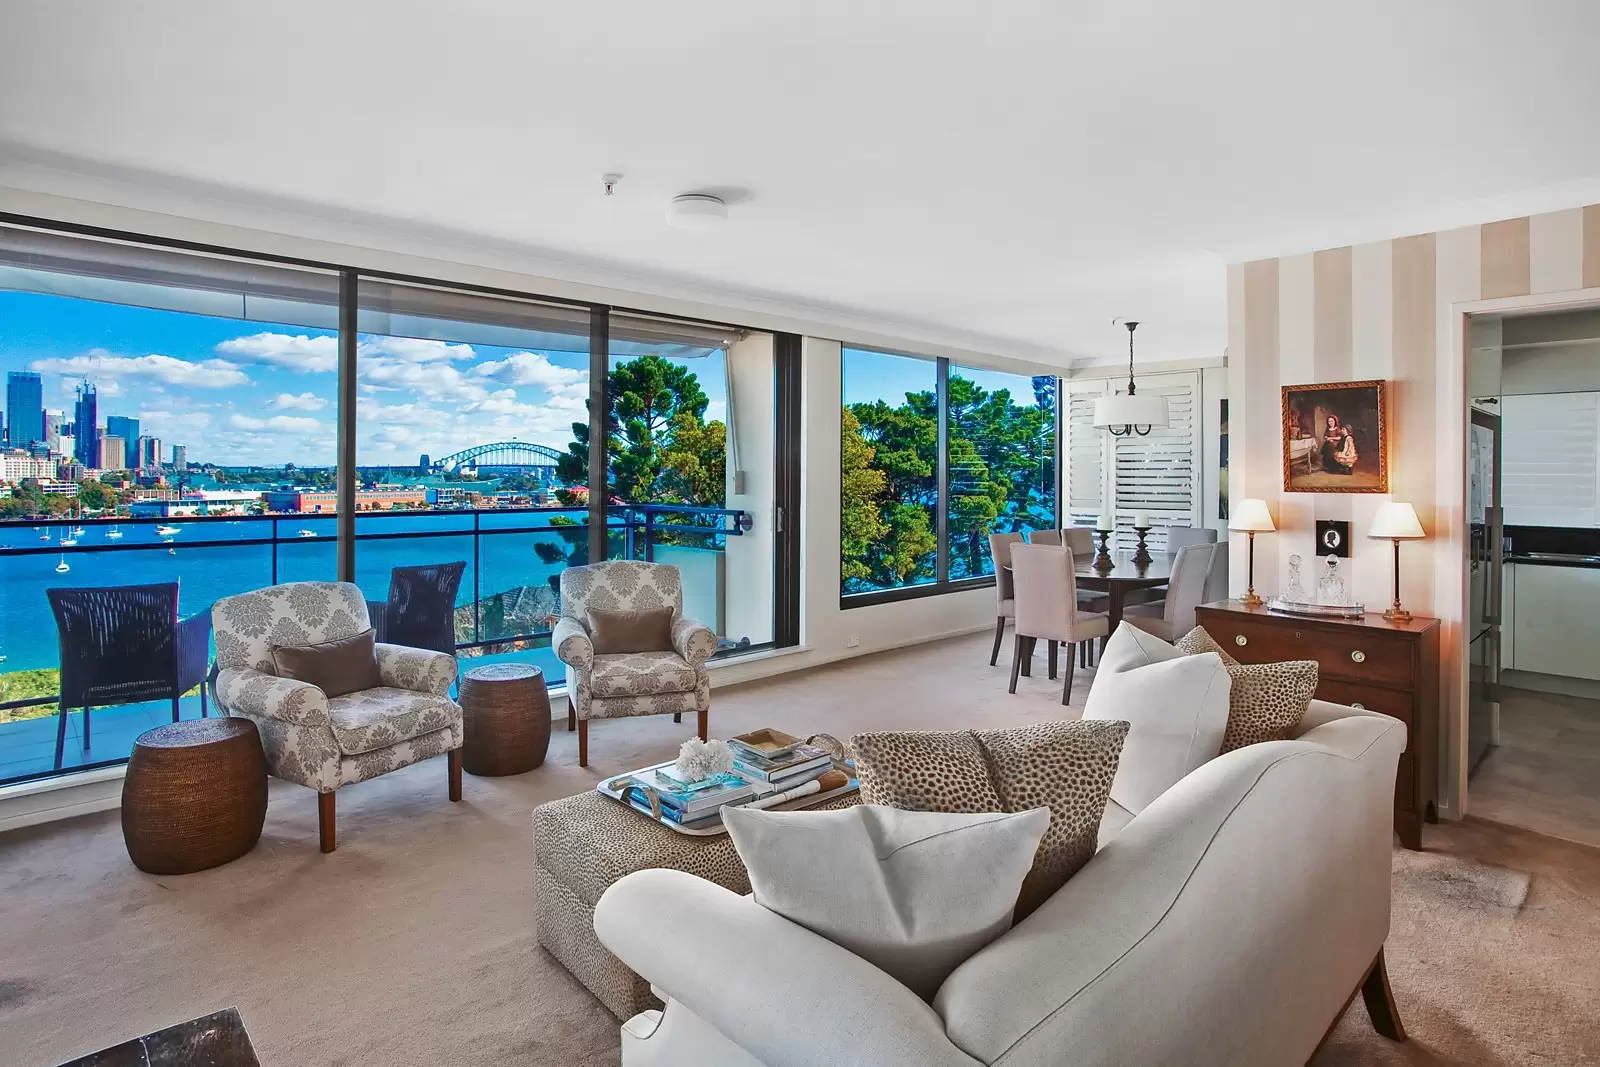 Photo #6: 5A/23 Thornton Street, Darling Point - Sold by Sydney Sotheby's International Realty